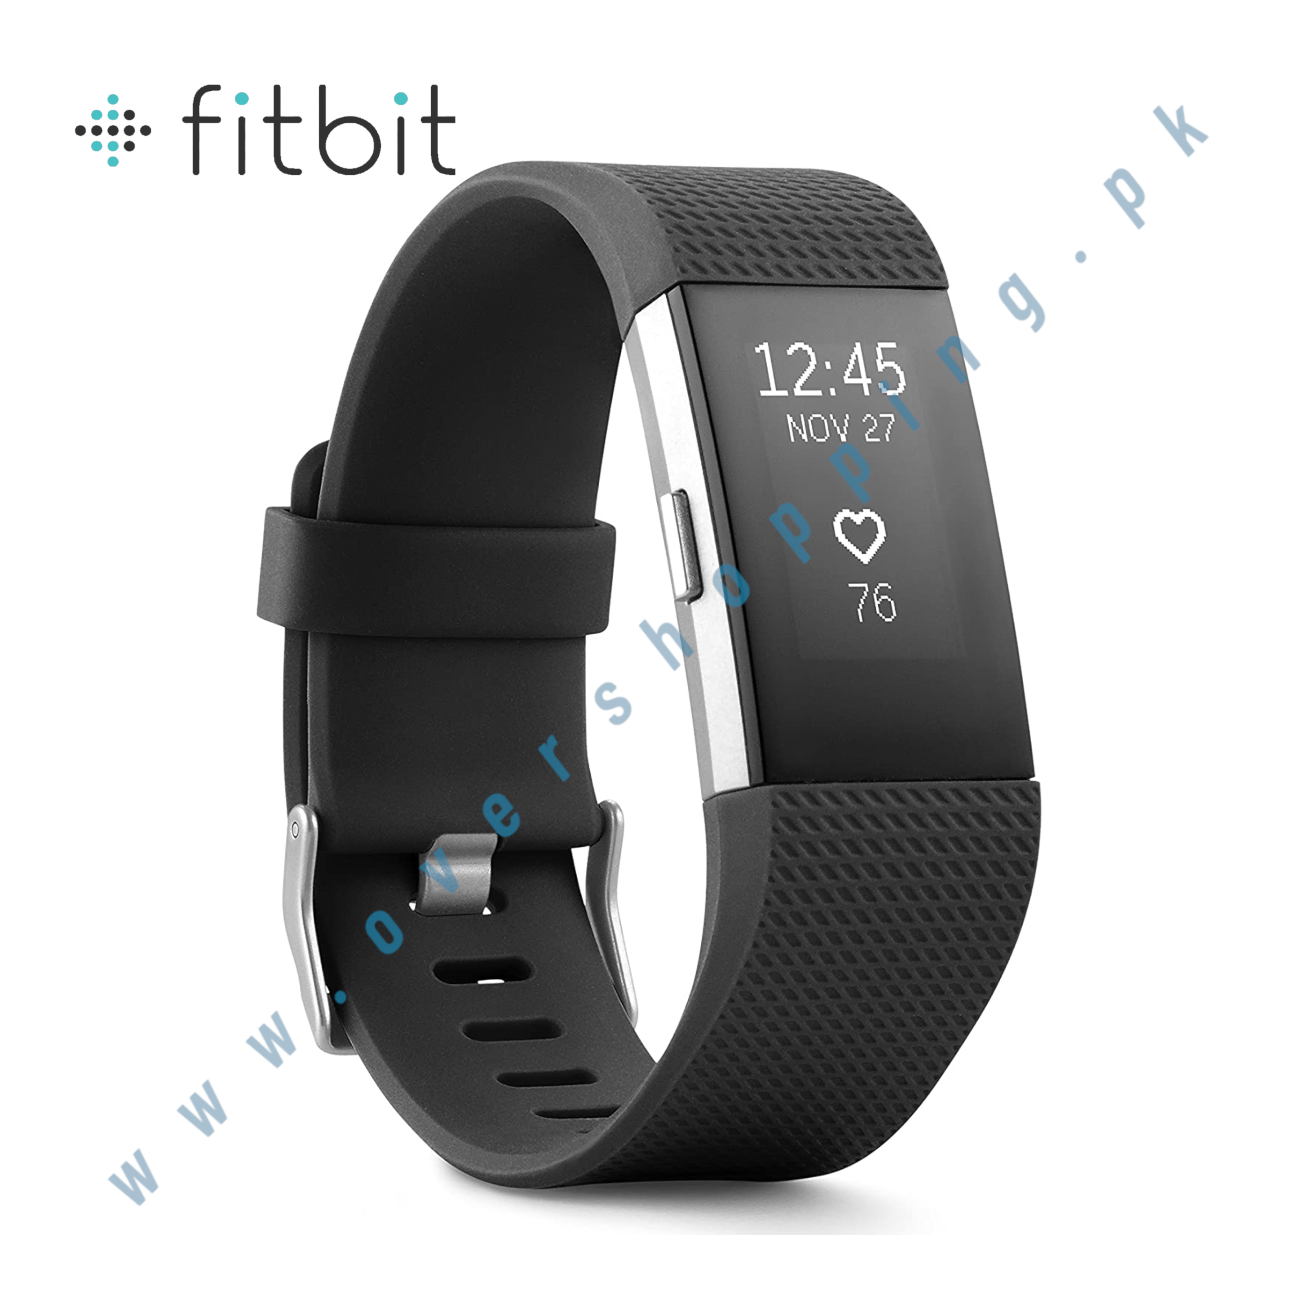 Fitbit Charge 2 Heart Rate + Fitness Wristband, Black, Small